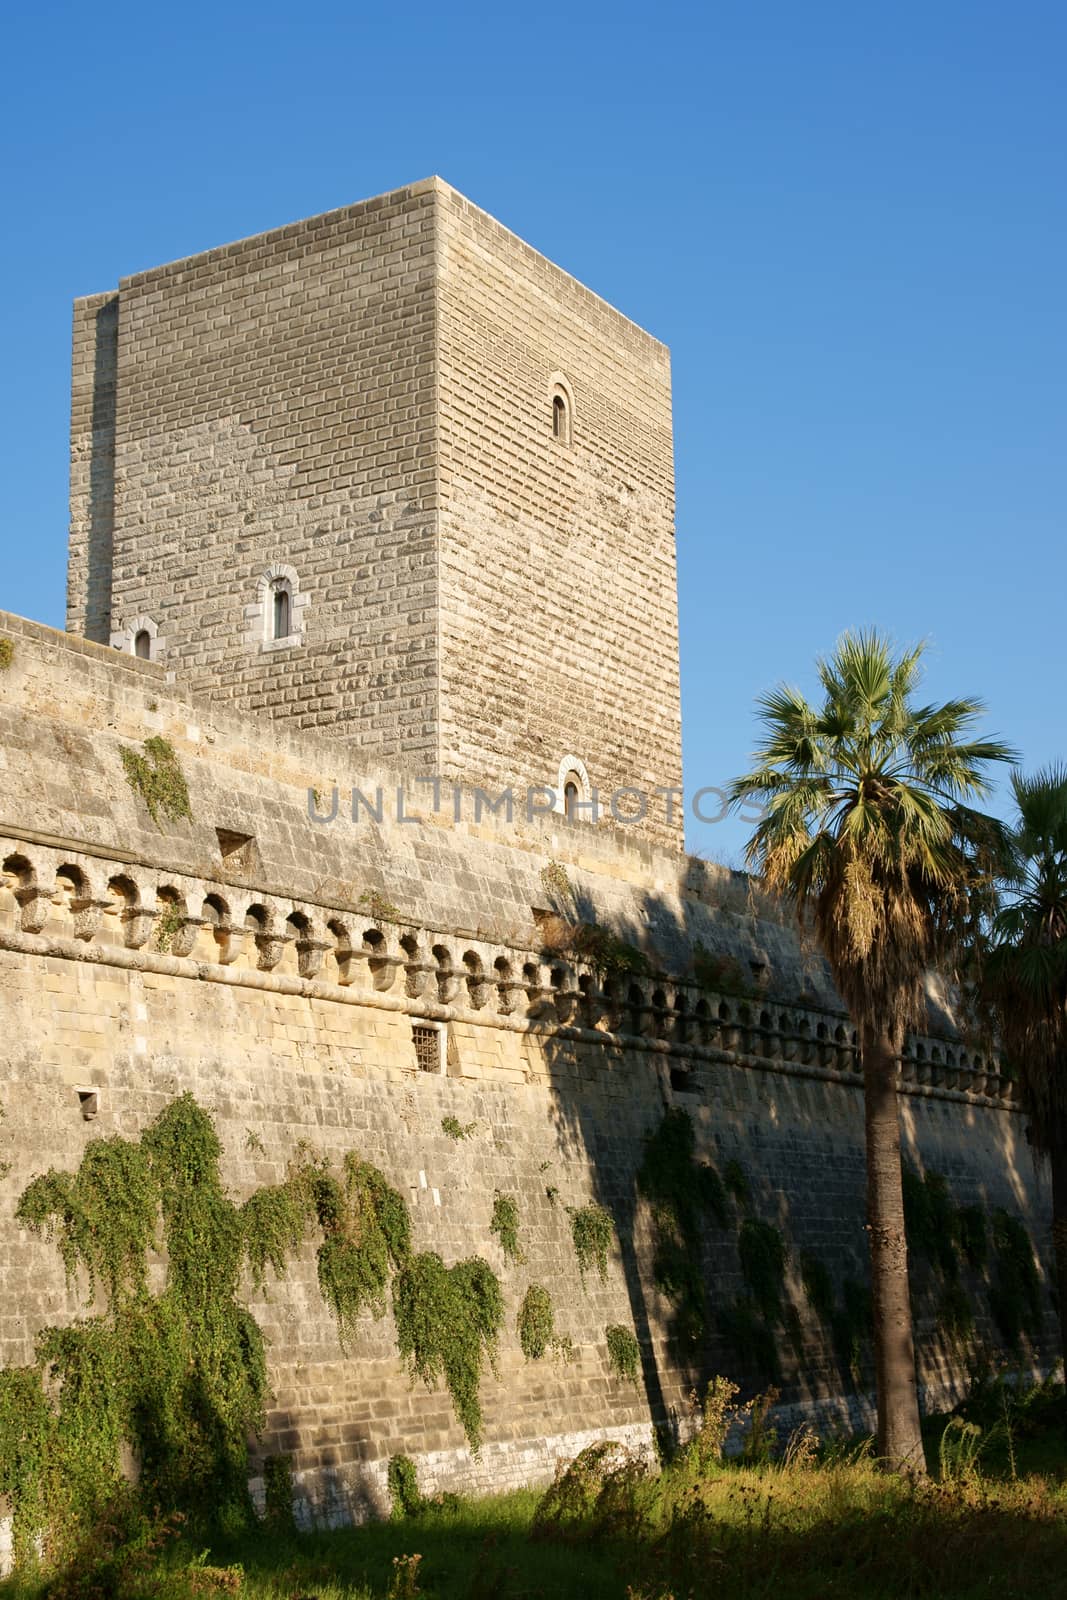 The Norman-Swabian castle of Bari was built by the Normans in the XII century and restored by Frederick II of Swabia, between 1233 and 1240. The medieval castle is located in the central area of the chief town of Apulia in Italy.